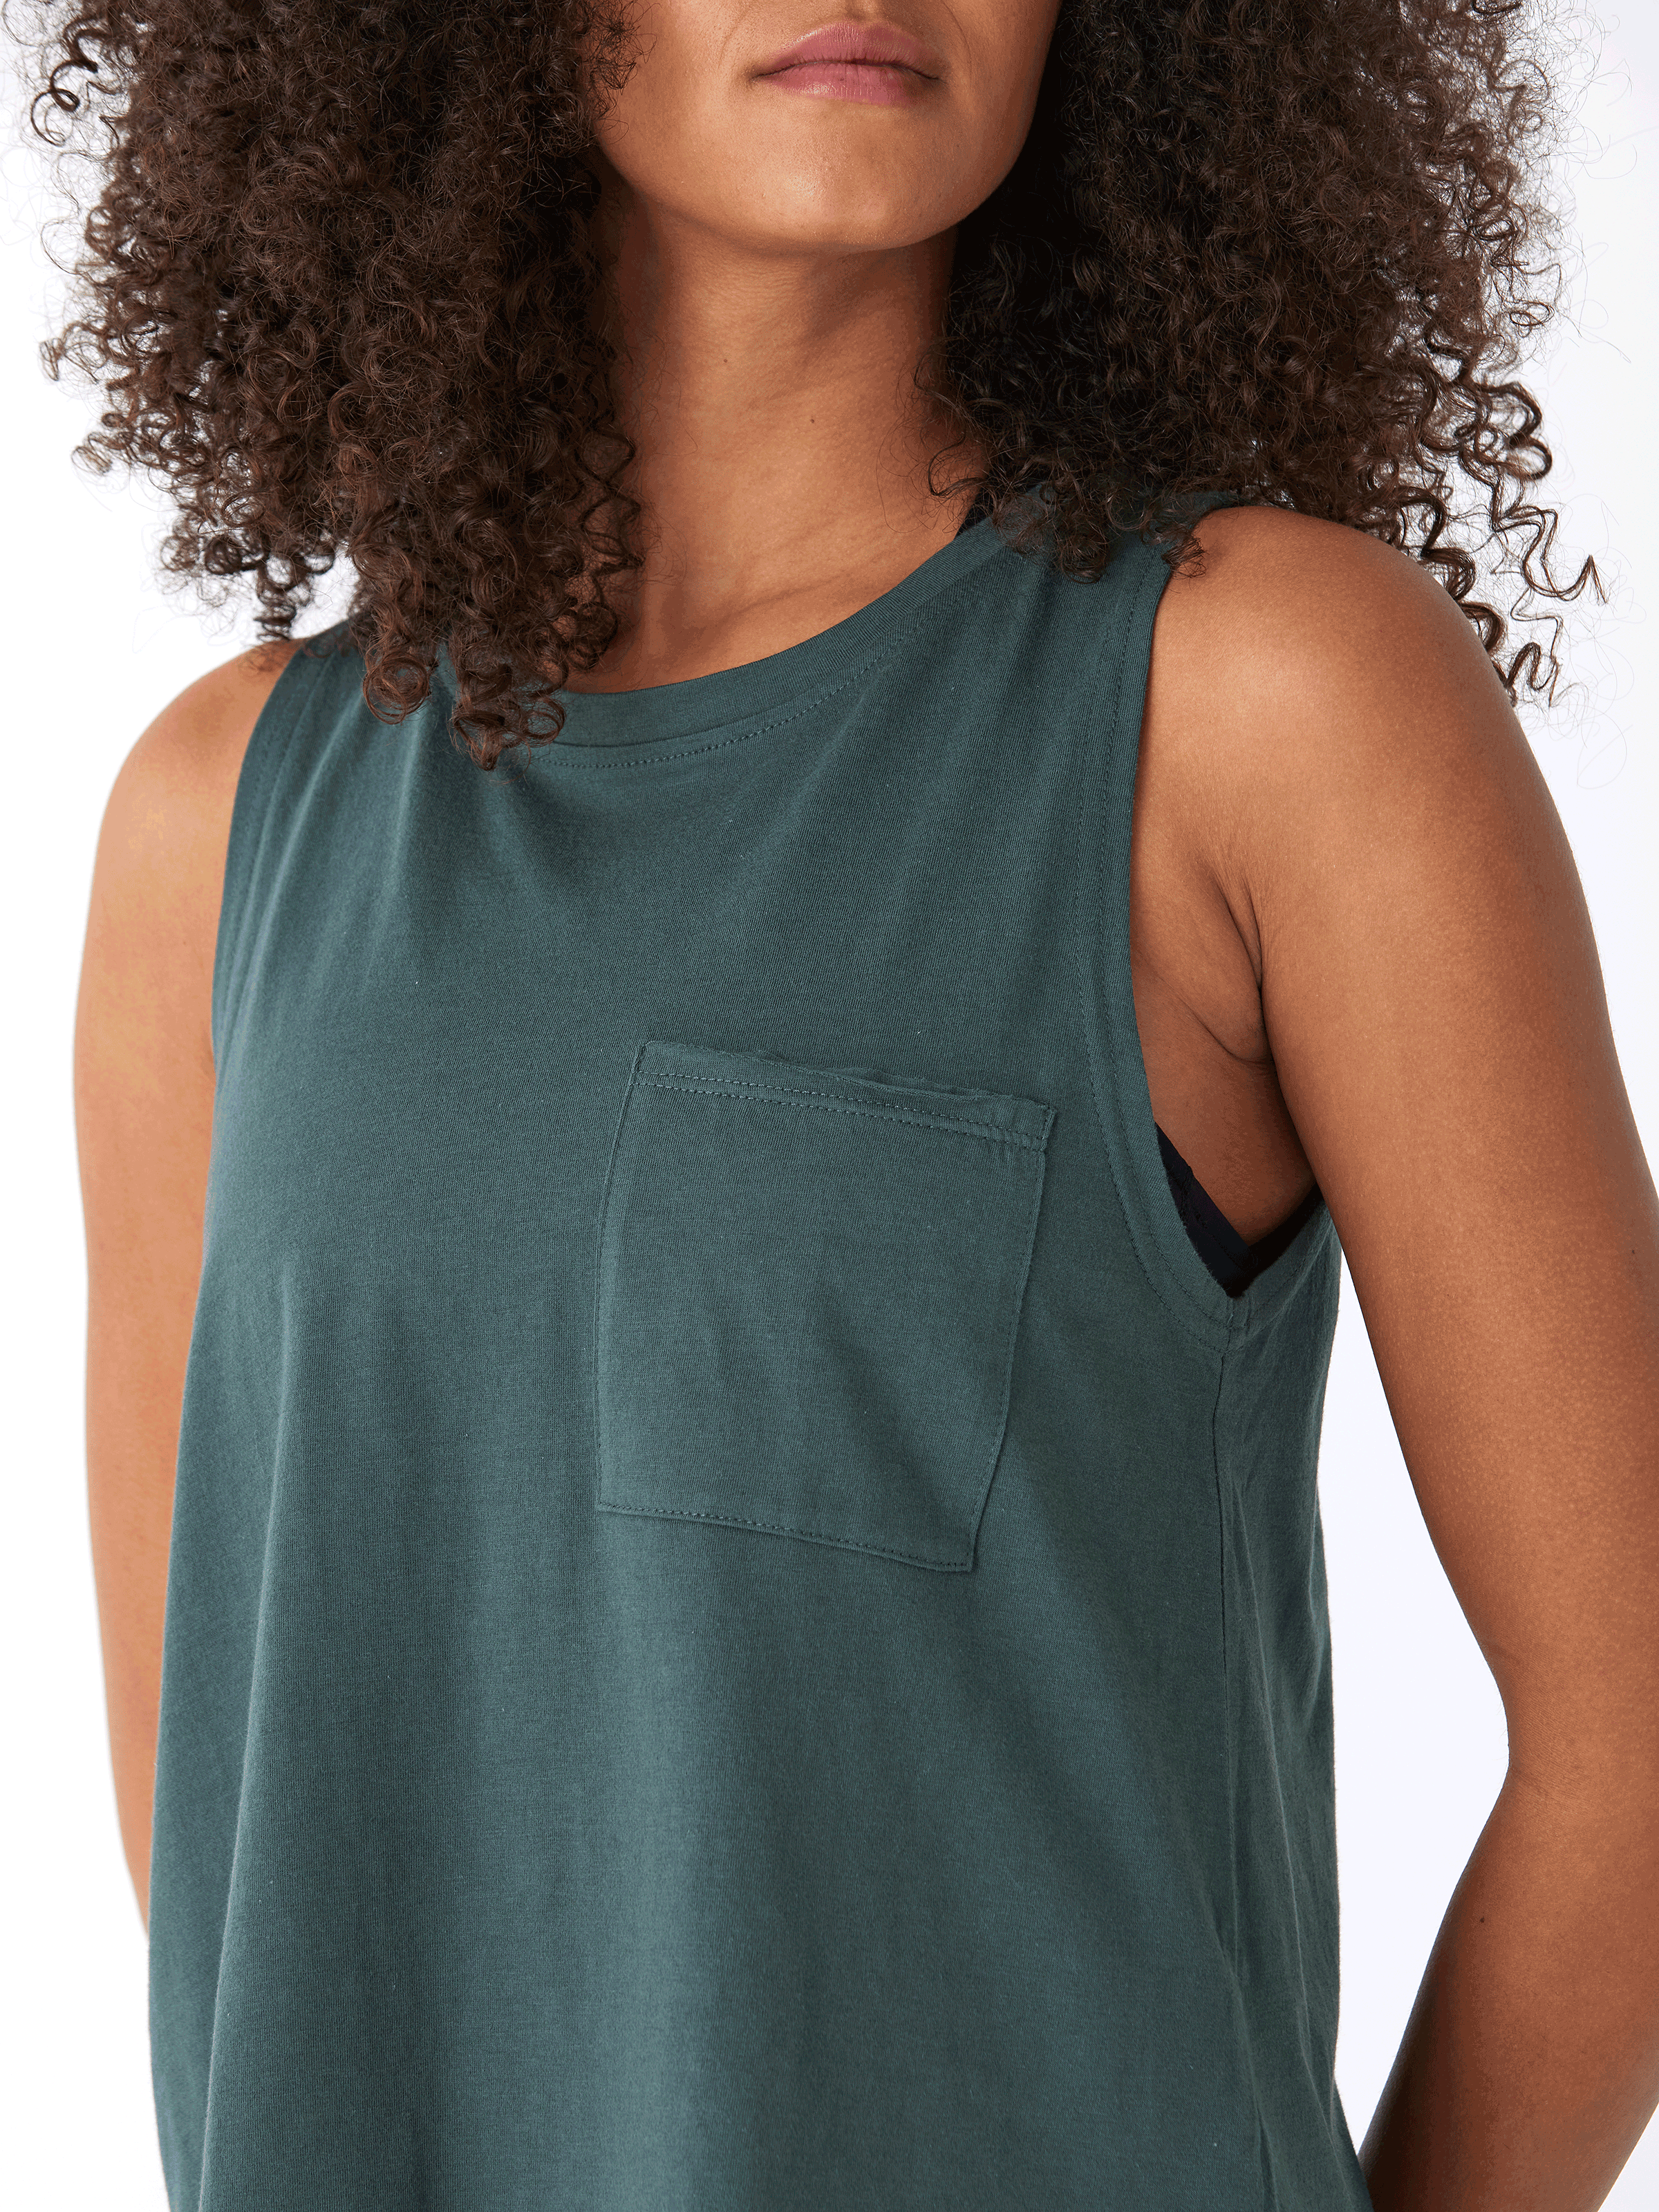 Maggie Comfort Jersey Tank Womens Tops Tanks Threads 4 Thought 